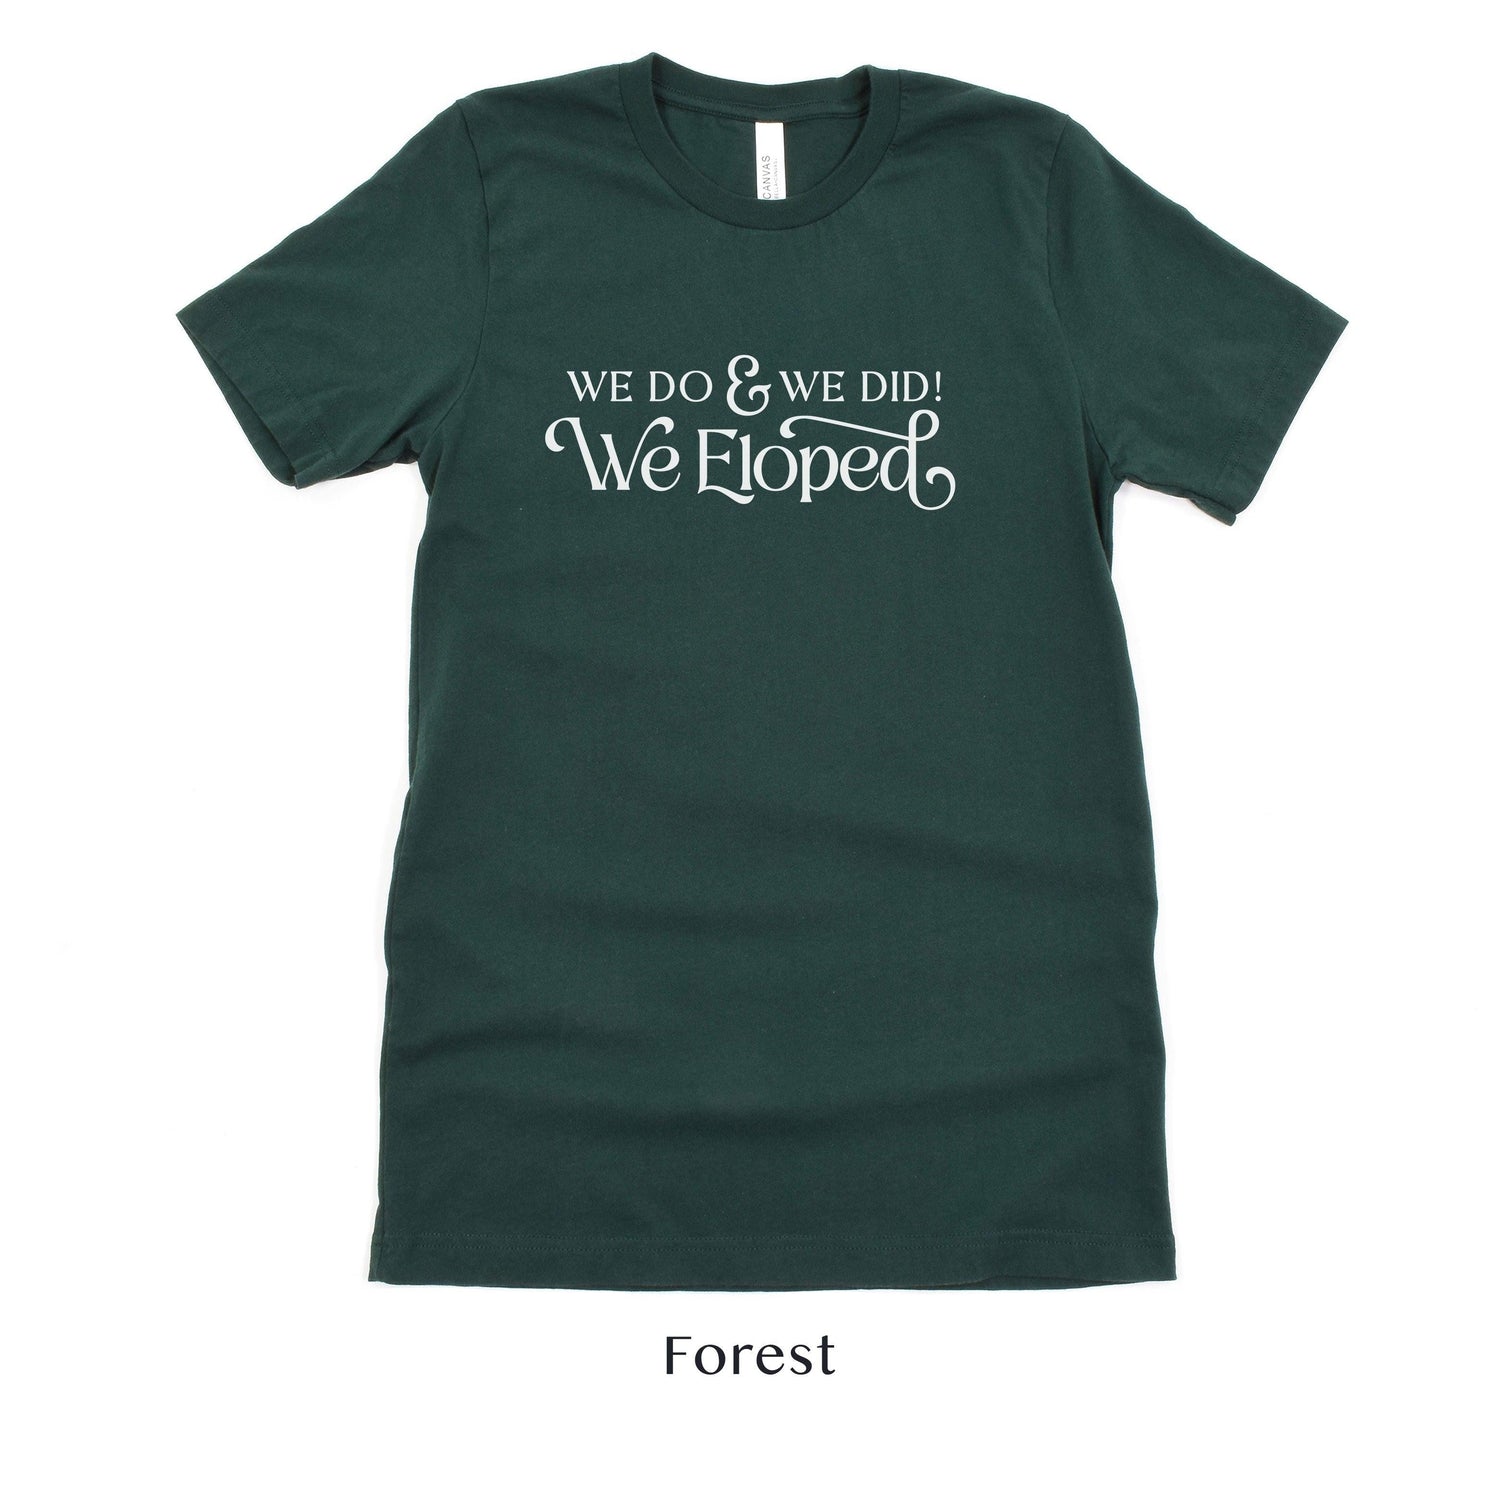 Black And White 'We Do, and We Did! We Eloped’ – Tee by Oaklynn Lane - forest green elopement shirt